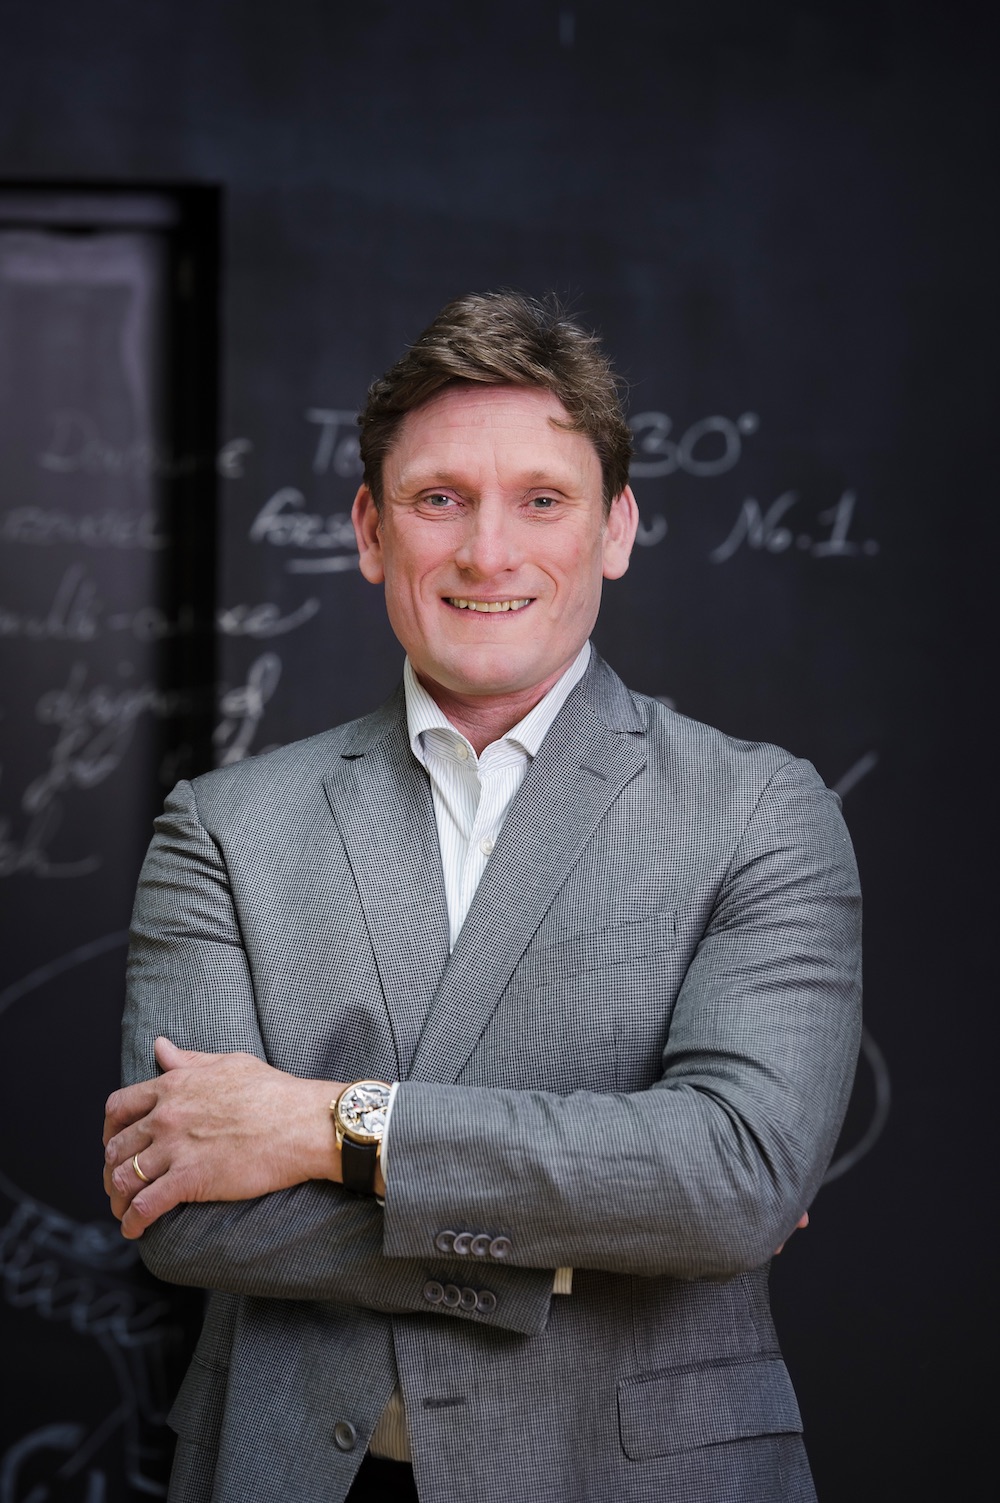 Haute Time Sits Down With Stephen Forsey, Co-Founder Of Greubel Forsey